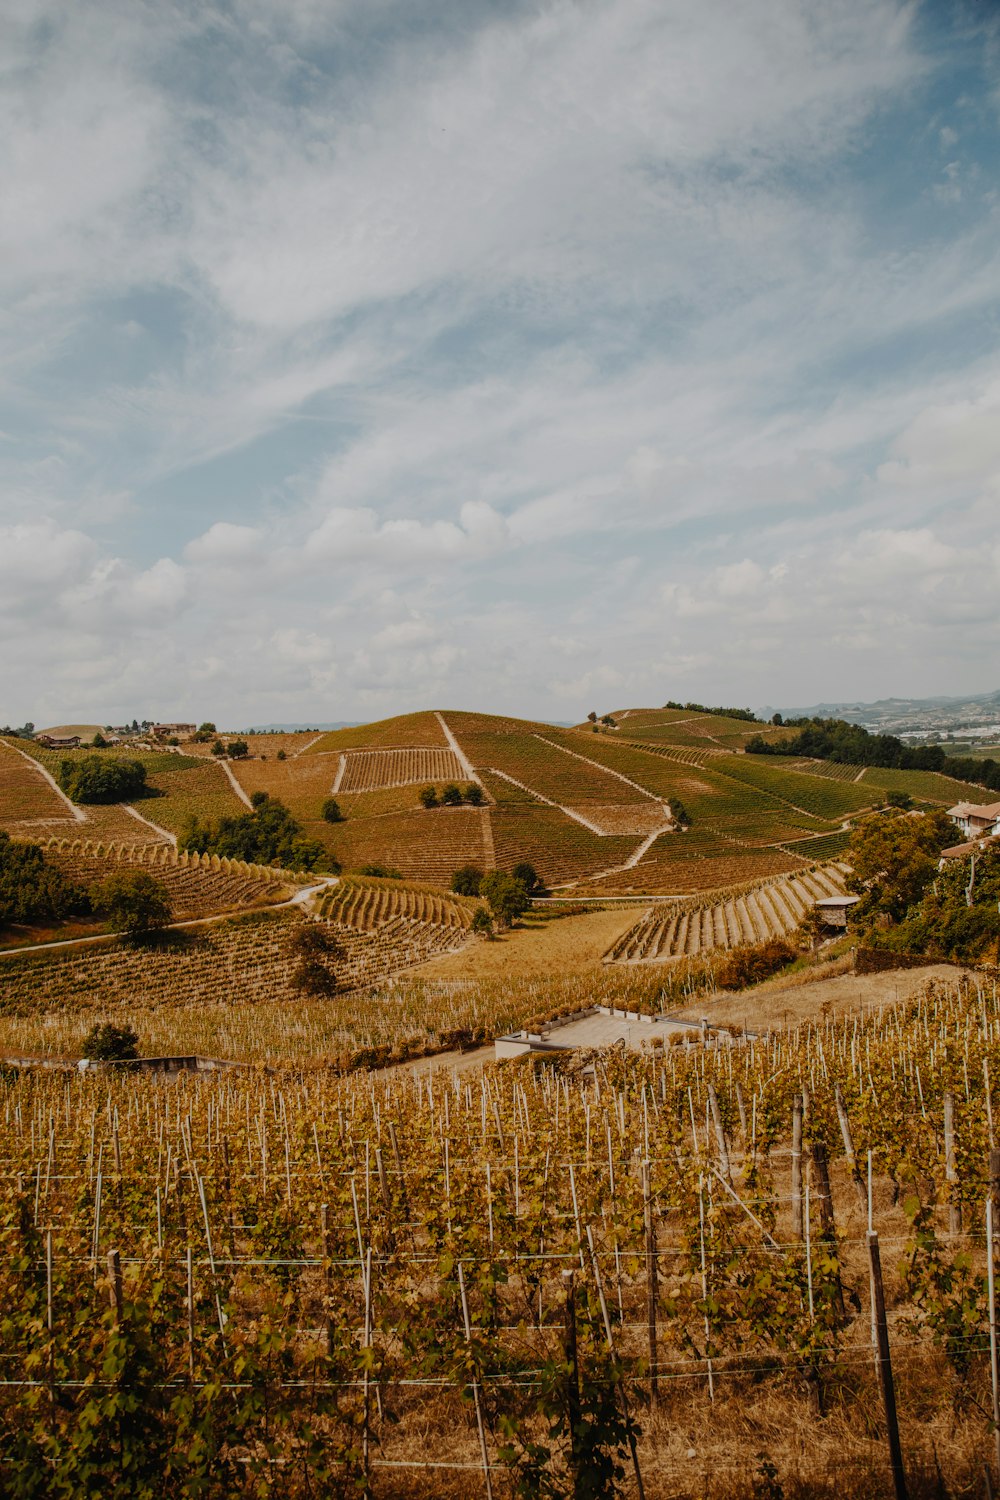 a vineyard with rows of vines in the foreground